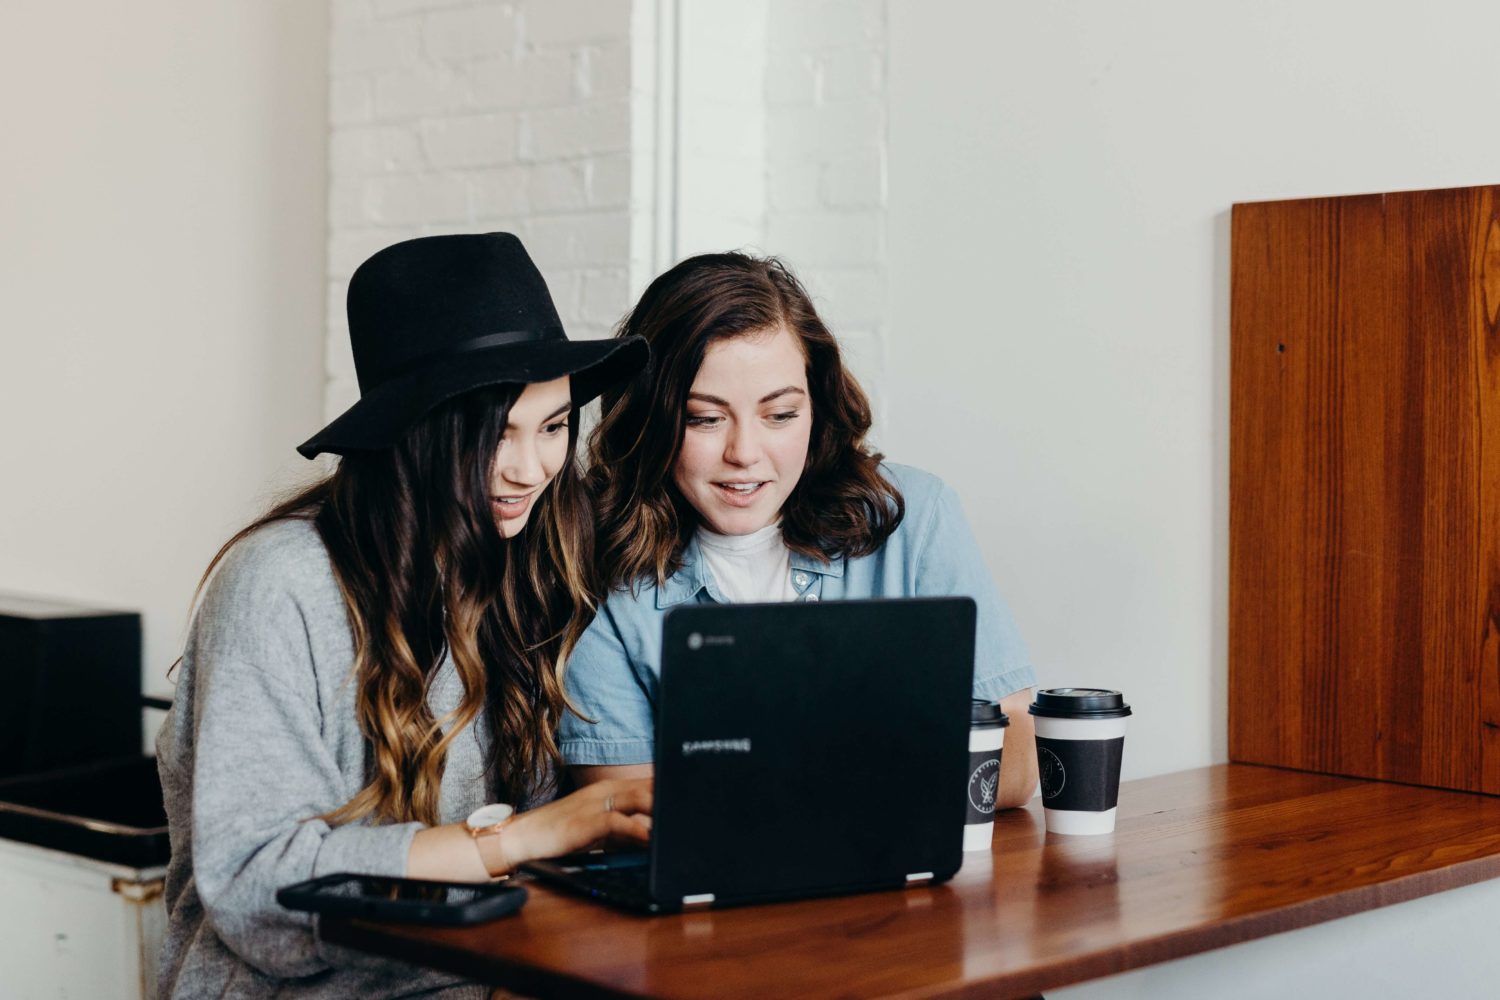 Women in a coworking space using their laptop